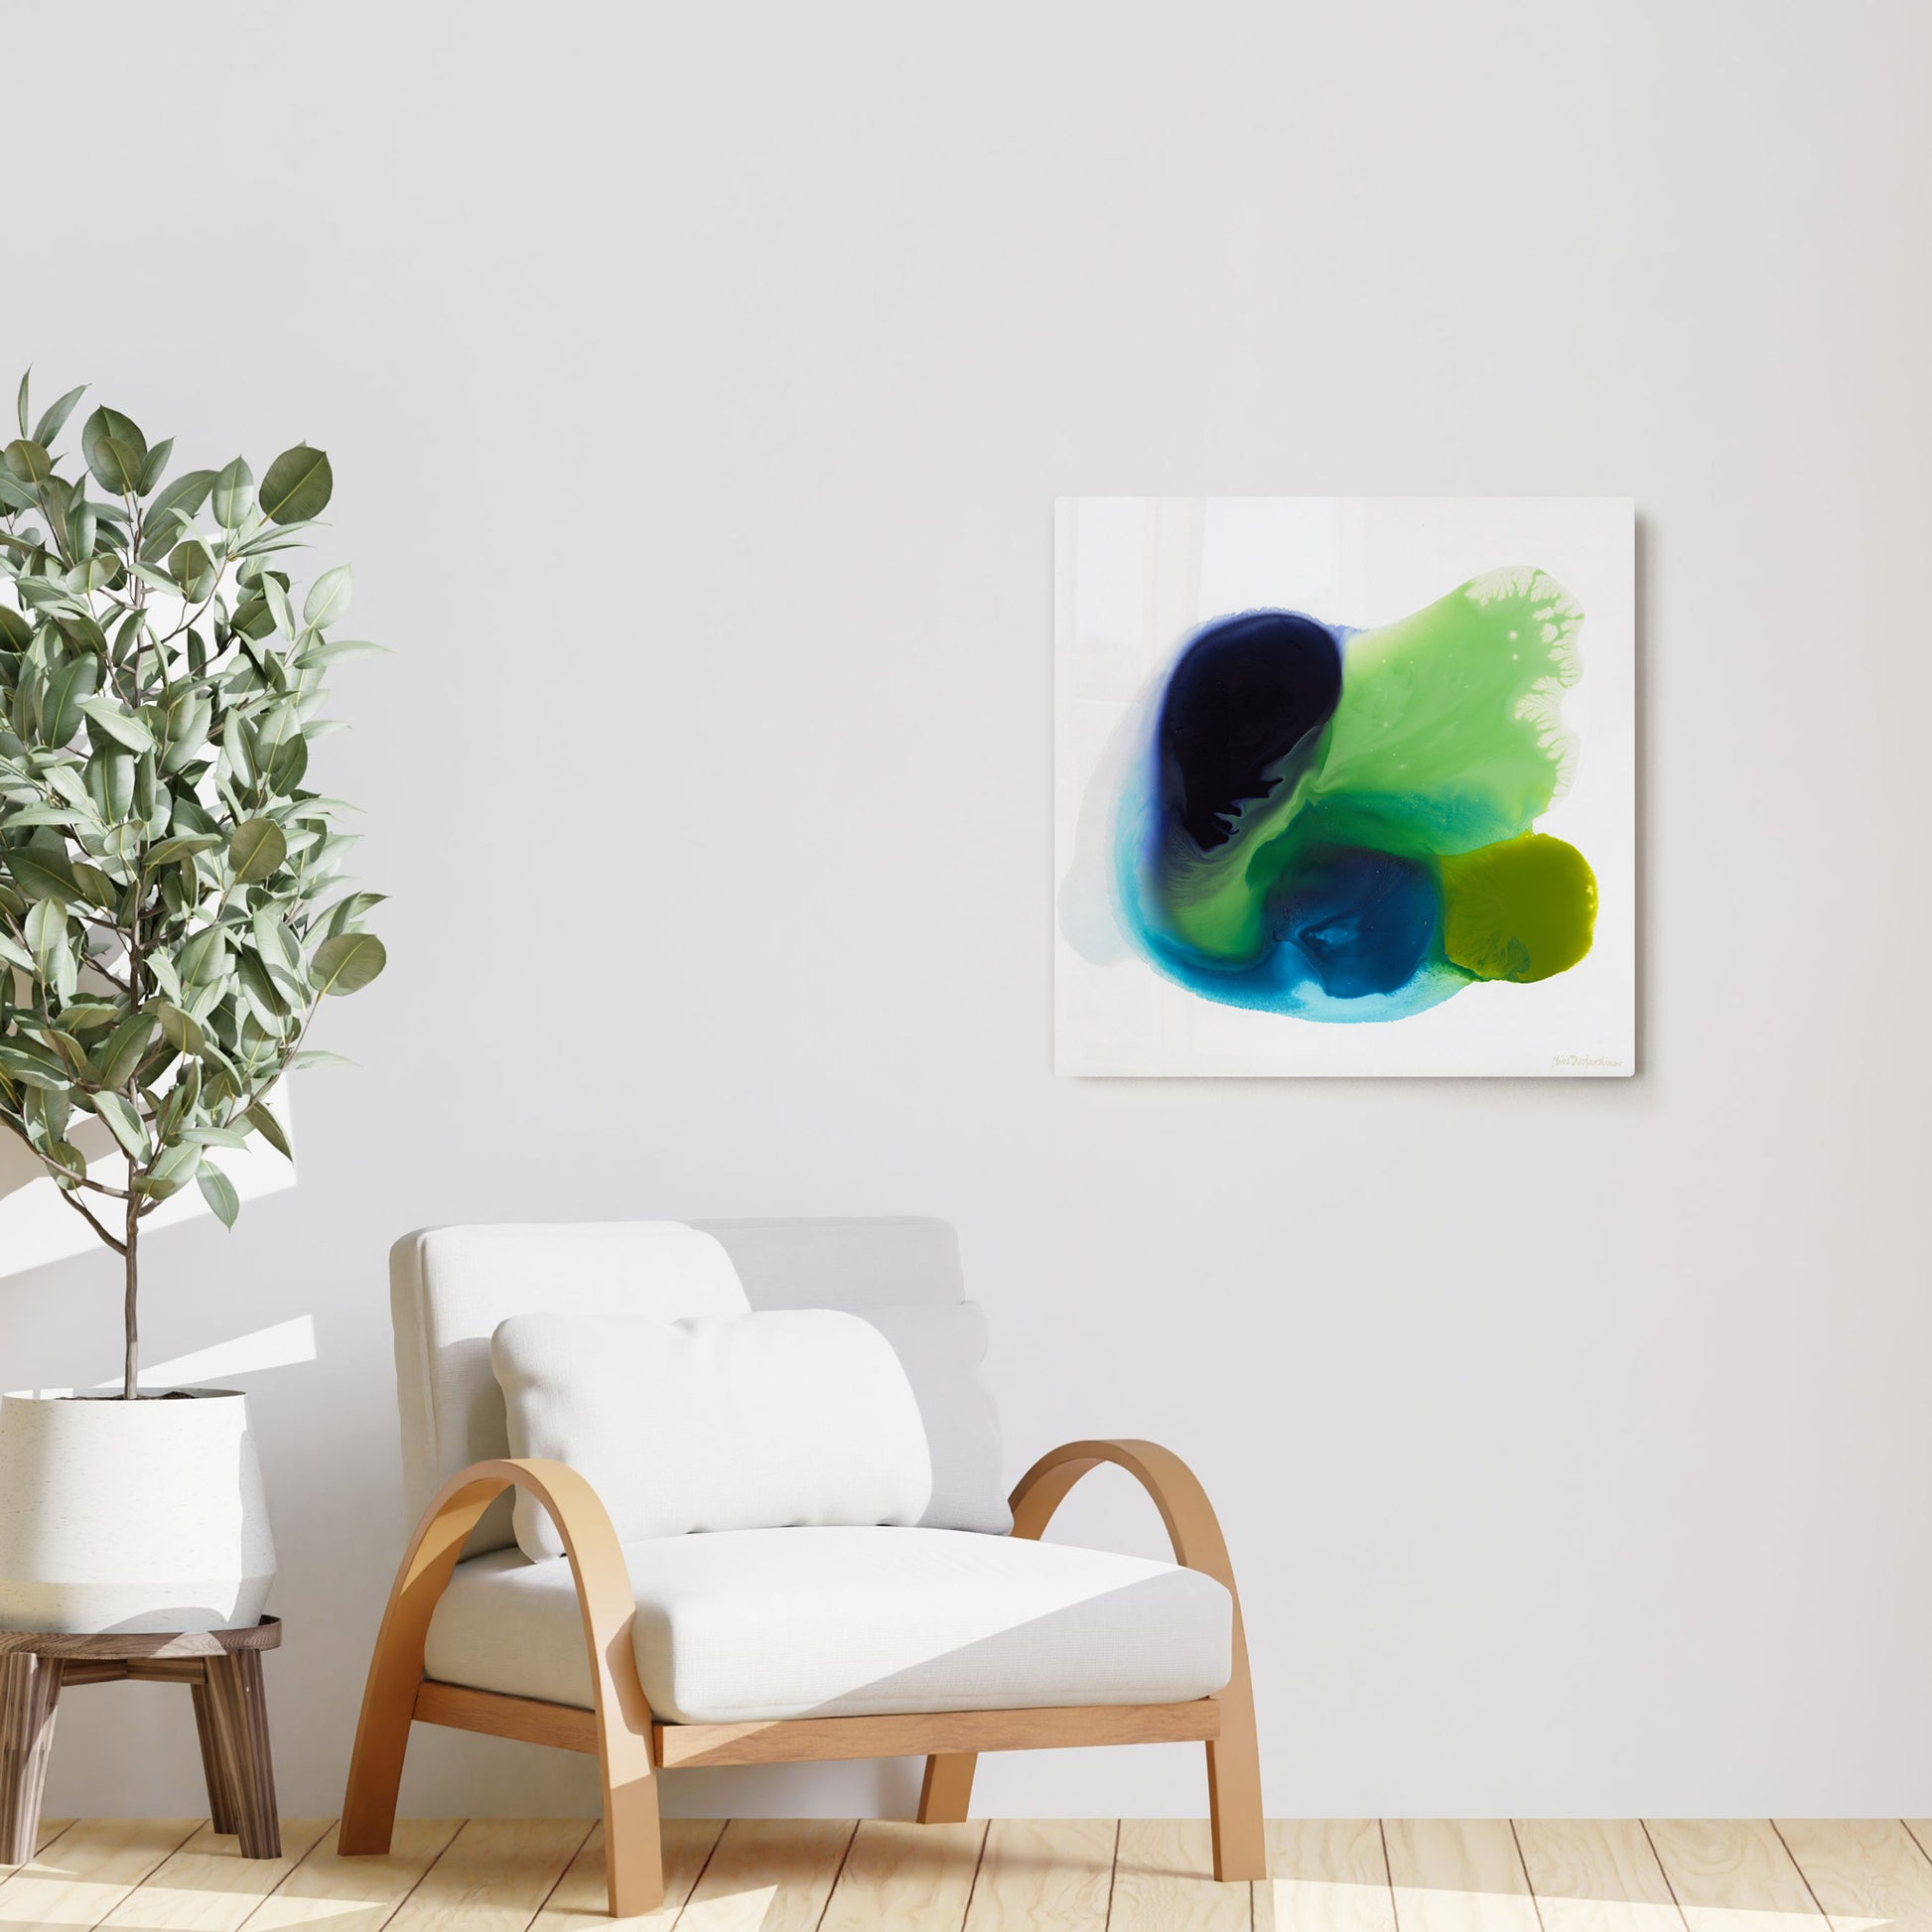 Claire Desjardins' Springtime painting reproduced on HD metal print and displayed on wall